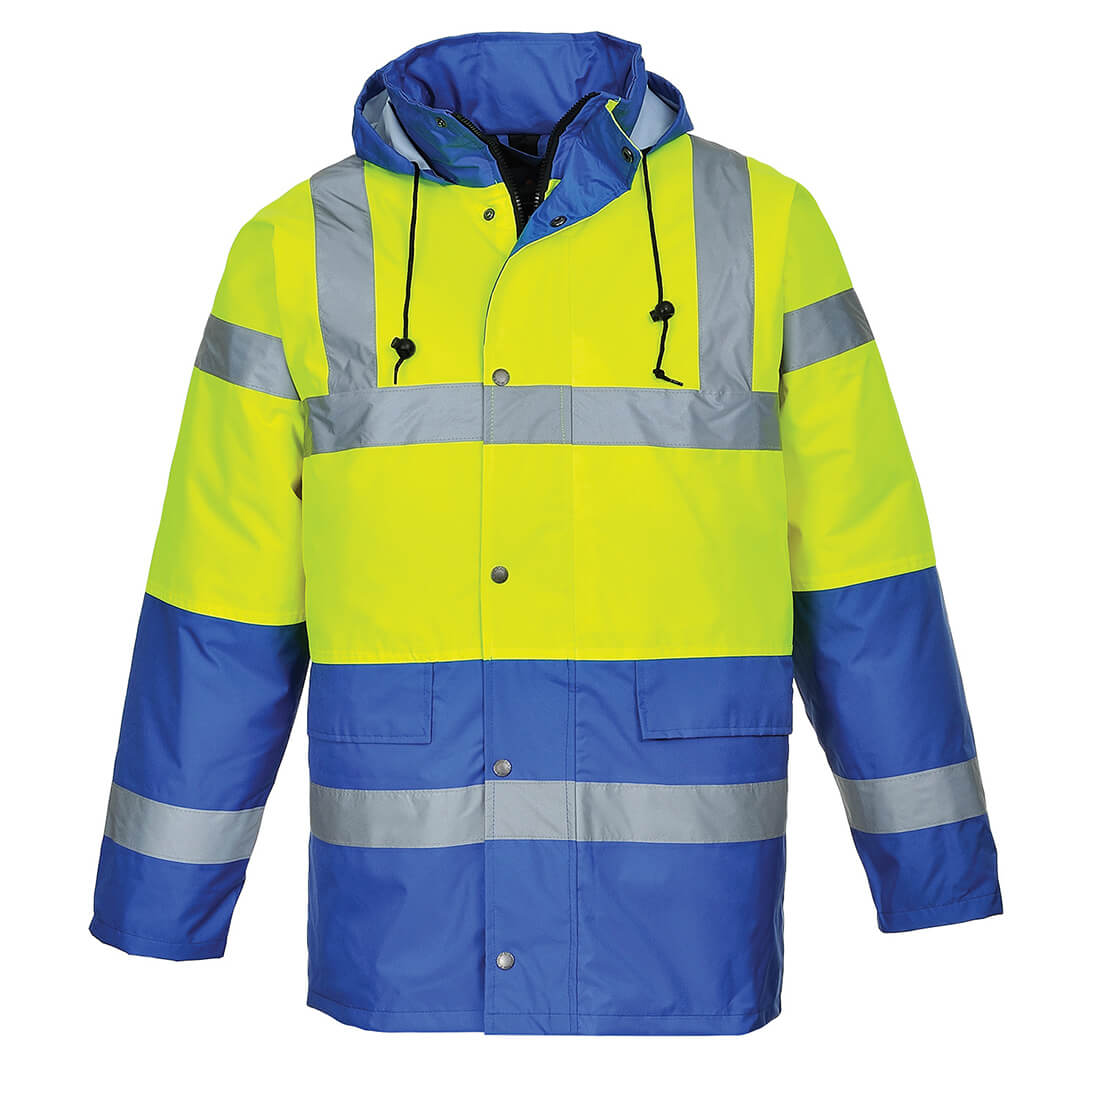 Image of Oxford Weave 300D Class 3 Hi Vis Contrast Traffic Jacket Yellow / Royal Blue XS